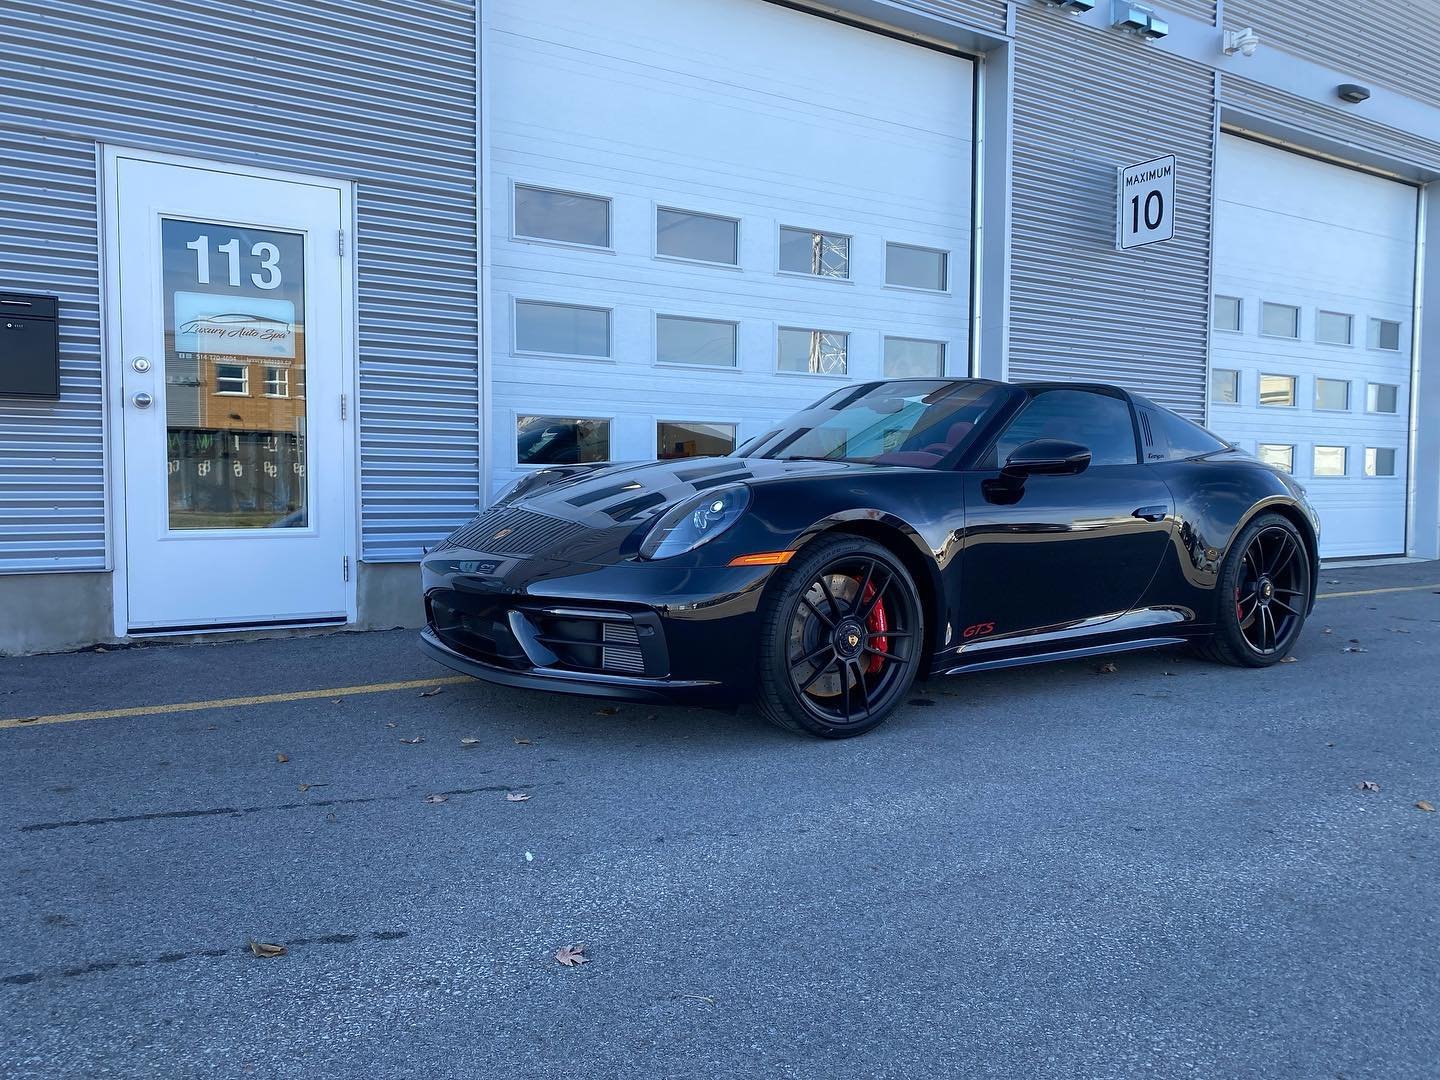 Unmatched style and unbeatable protection! Our client's Porsche Targa GTS just received the ultimate treatment - a full PPF installation and ceramic heat control window film. Now it's ready to hit the road in style, without worrying about any damage 